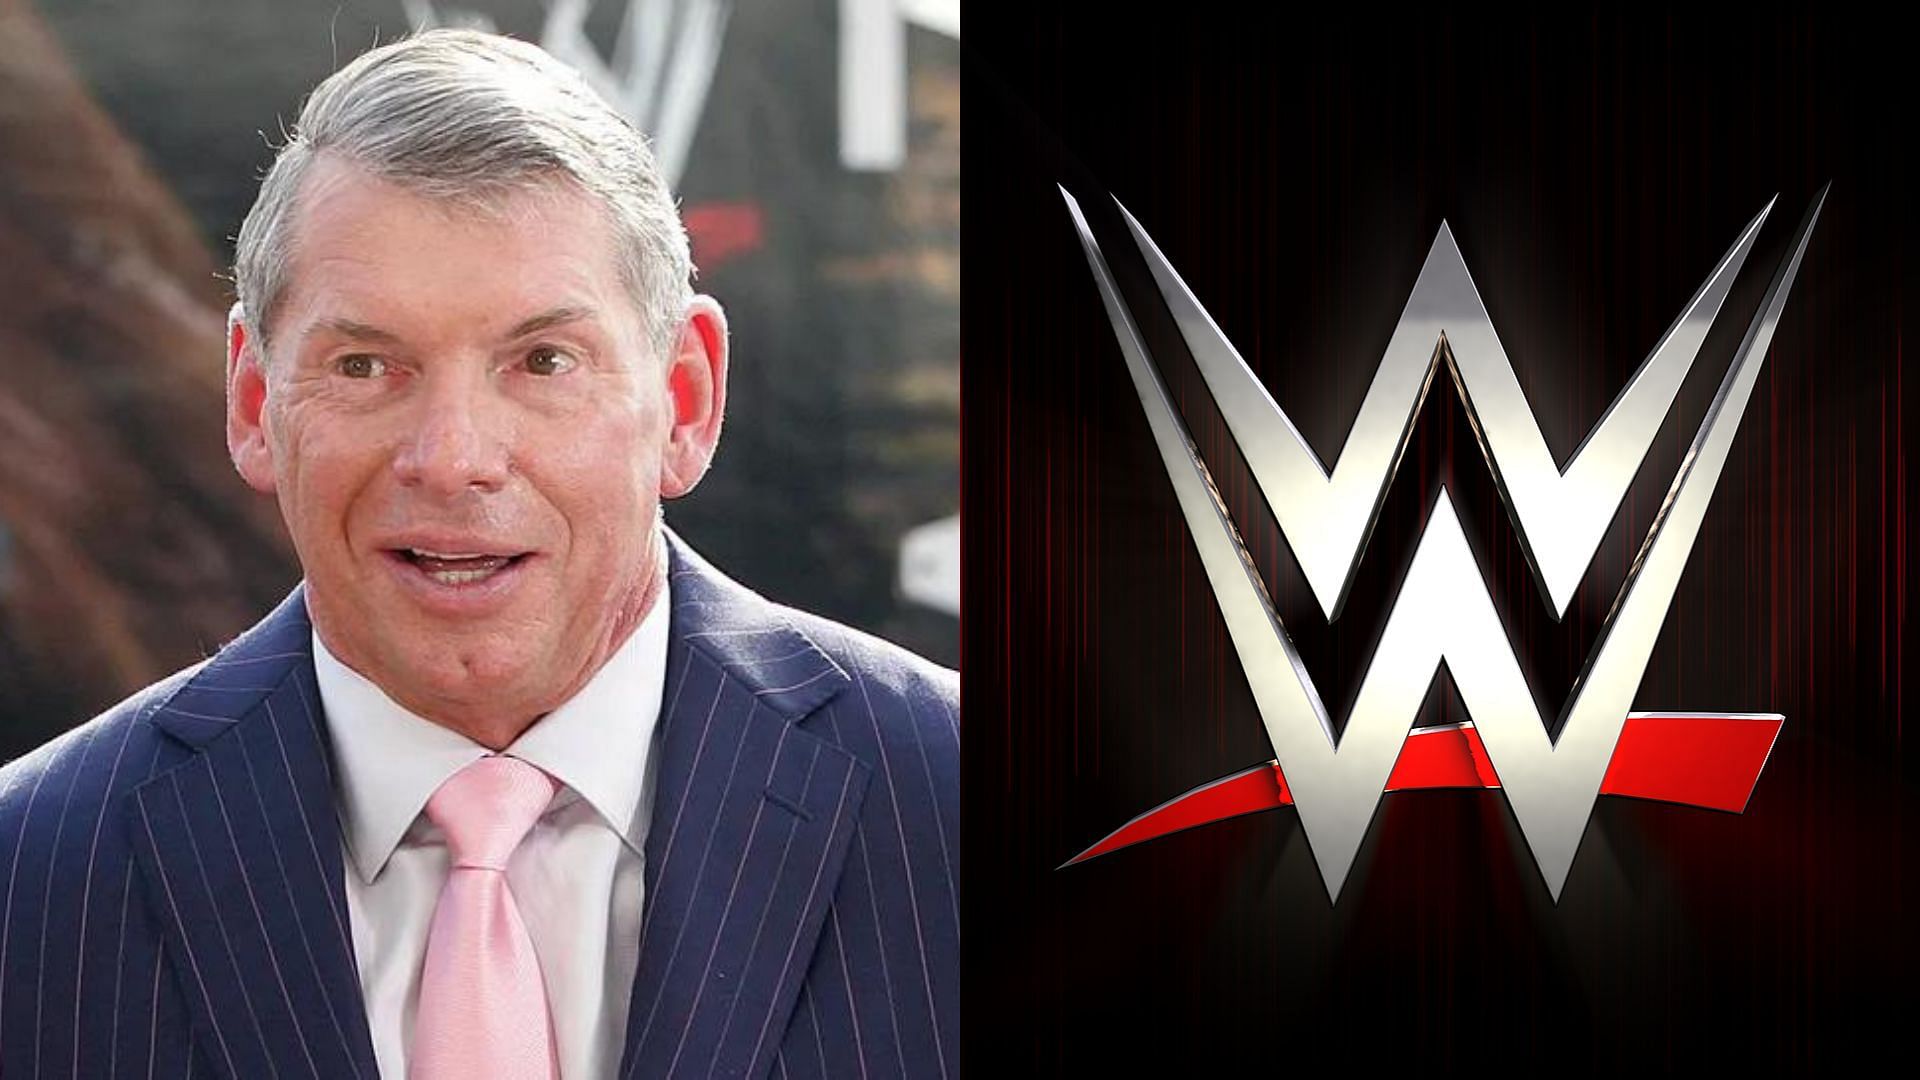 Major changes in WWE stock were seen amidst potential sale